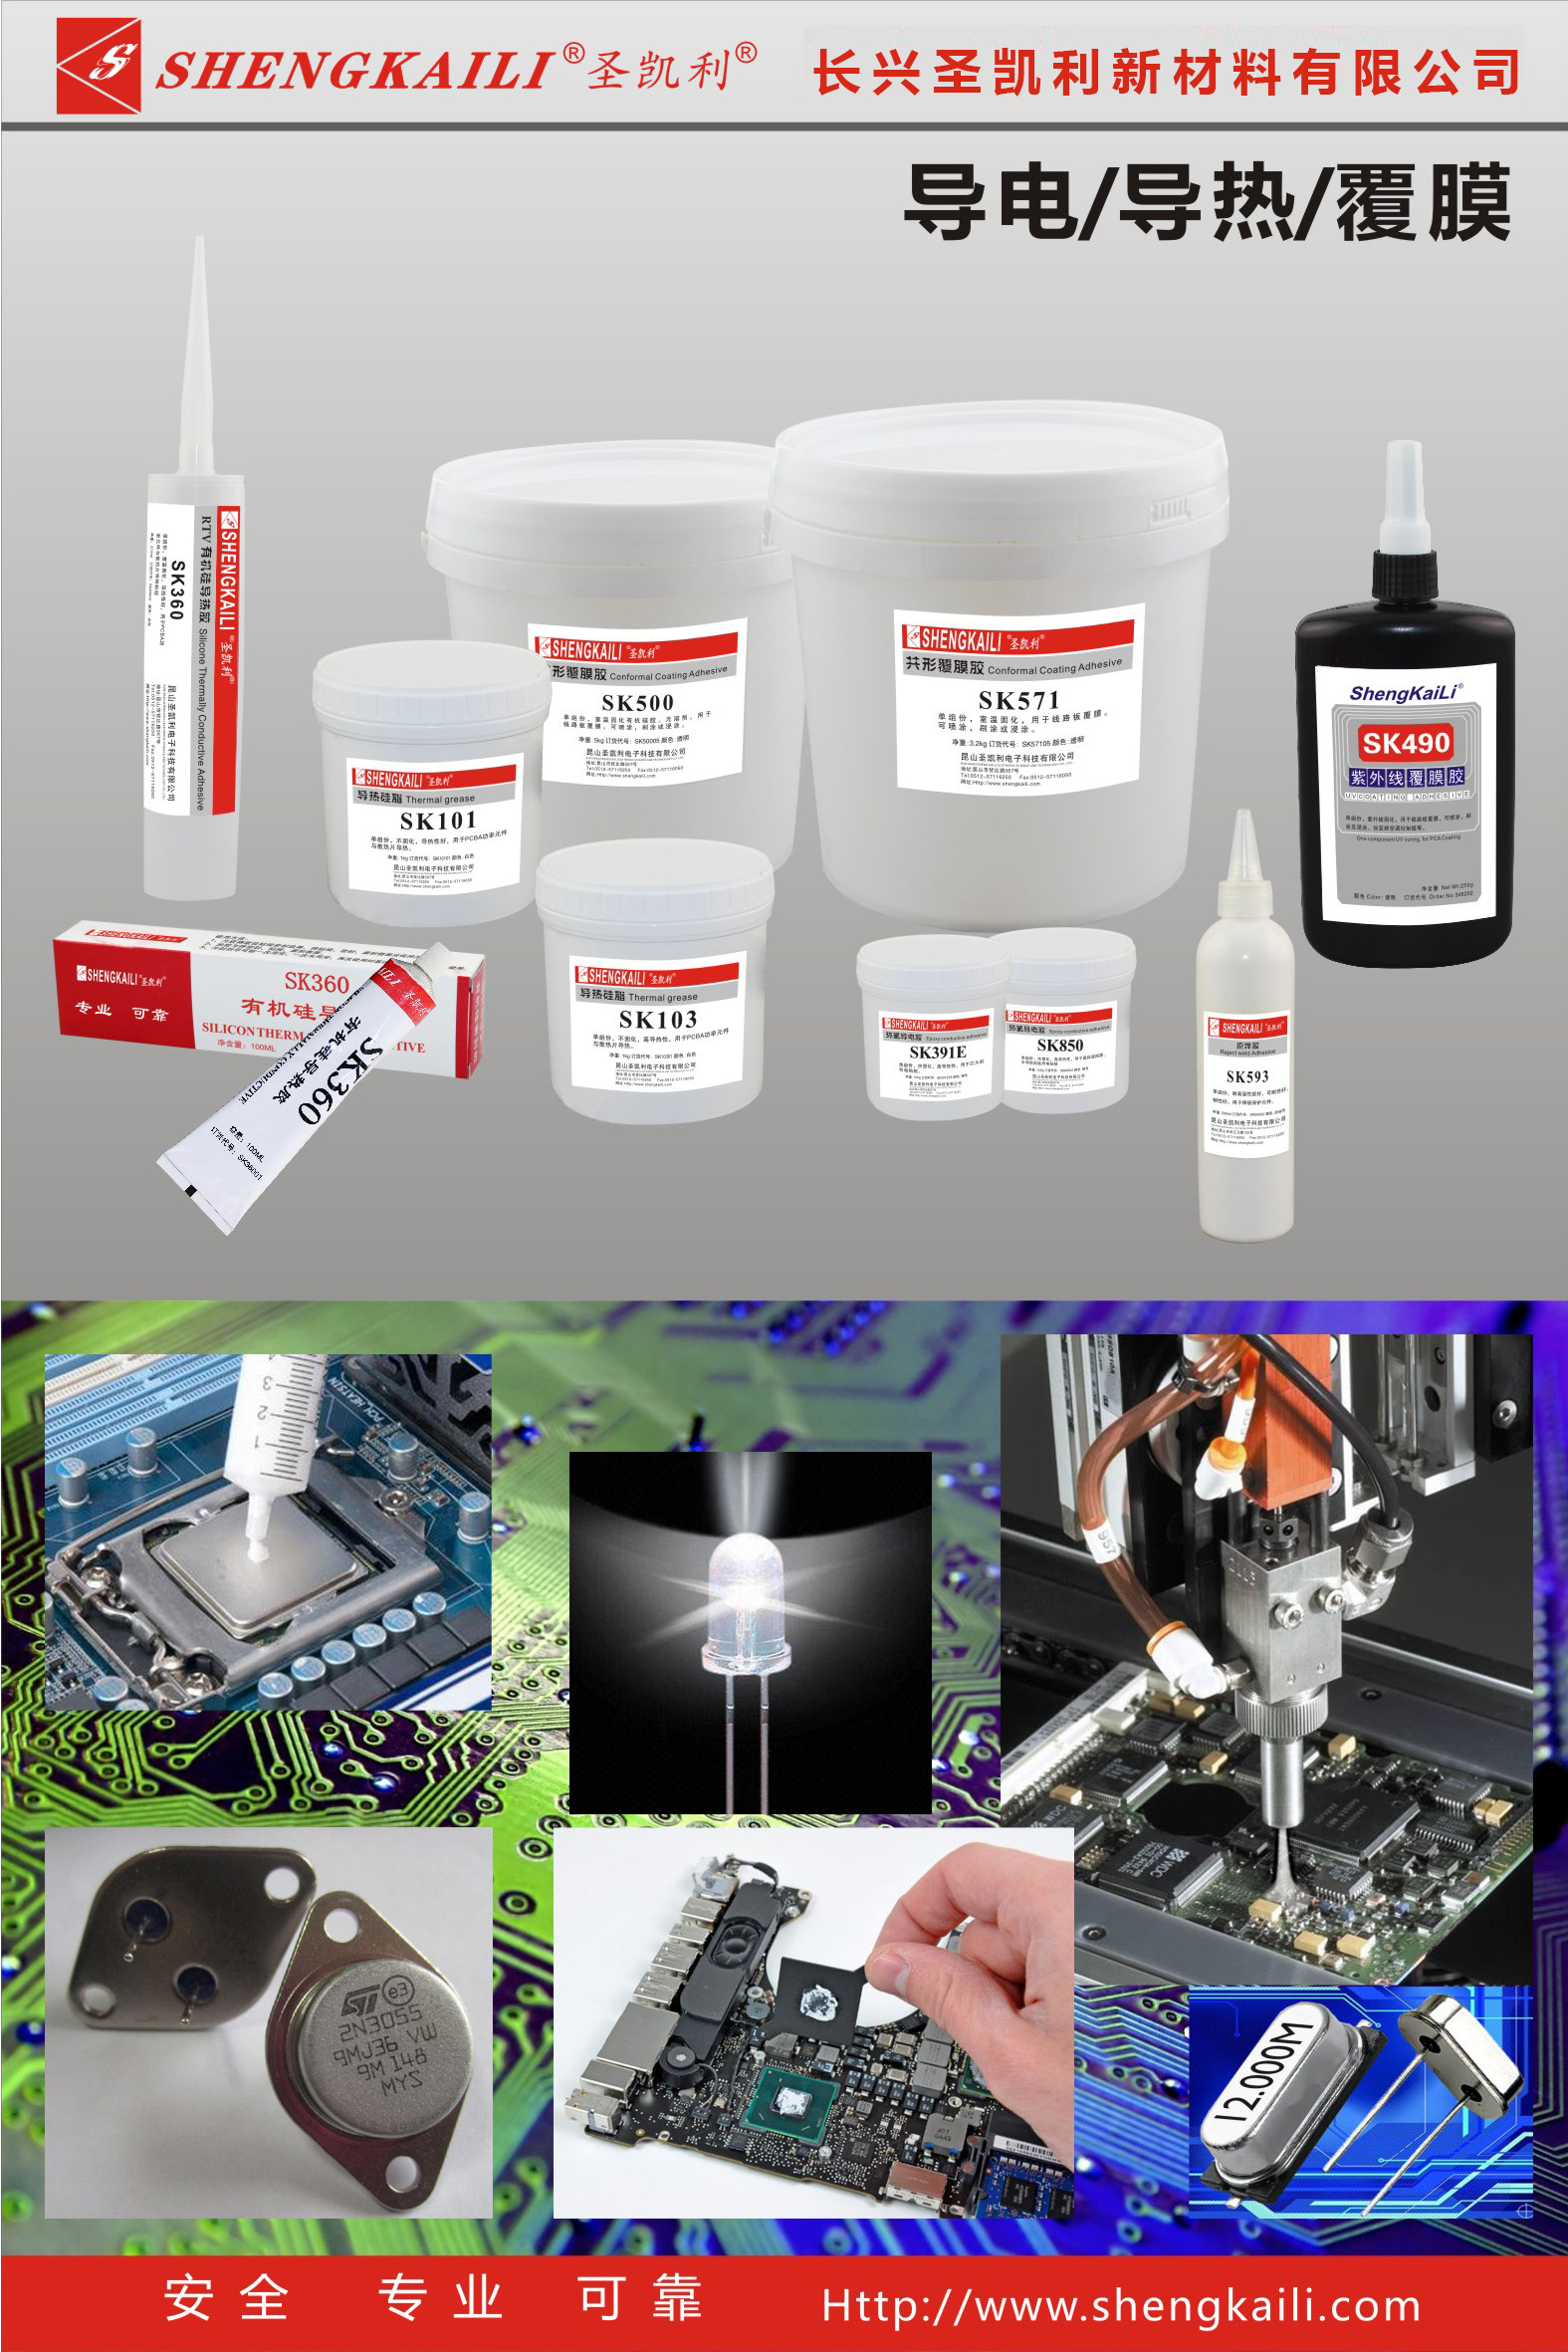 Heat conducting, conductive and film covering adhesive